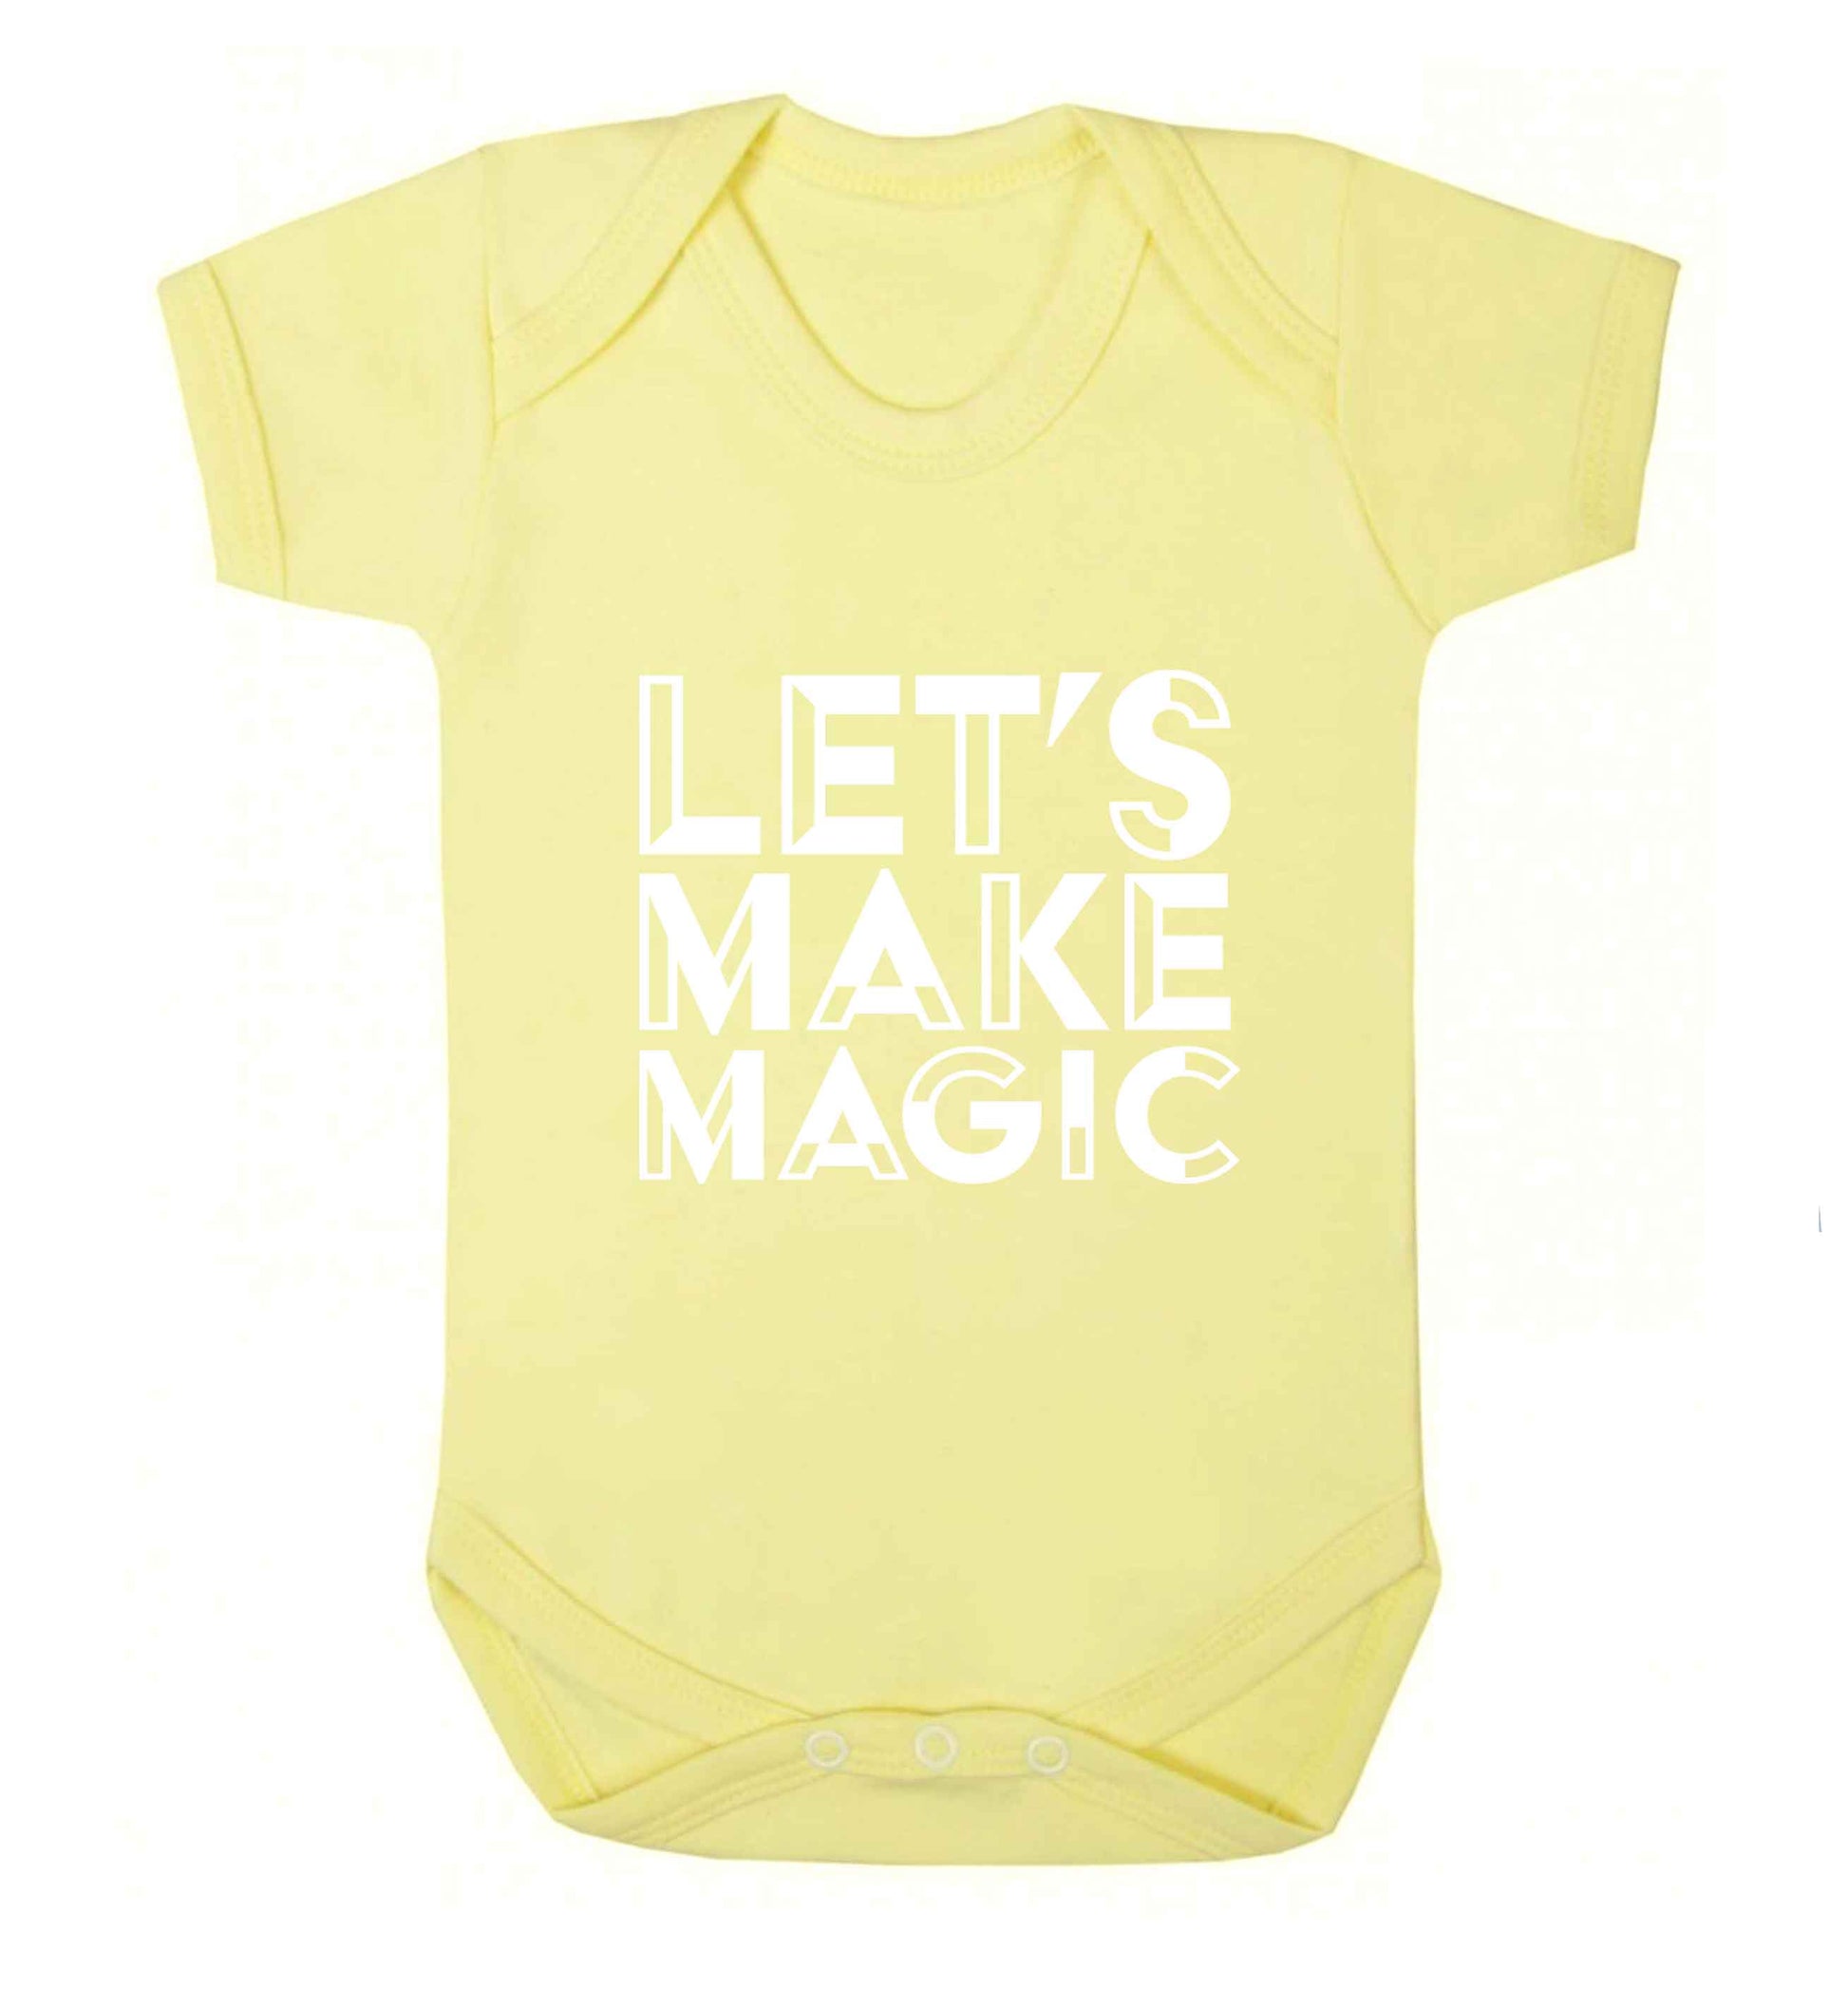 Let's make magic baby vest pale yellow 18-24 months